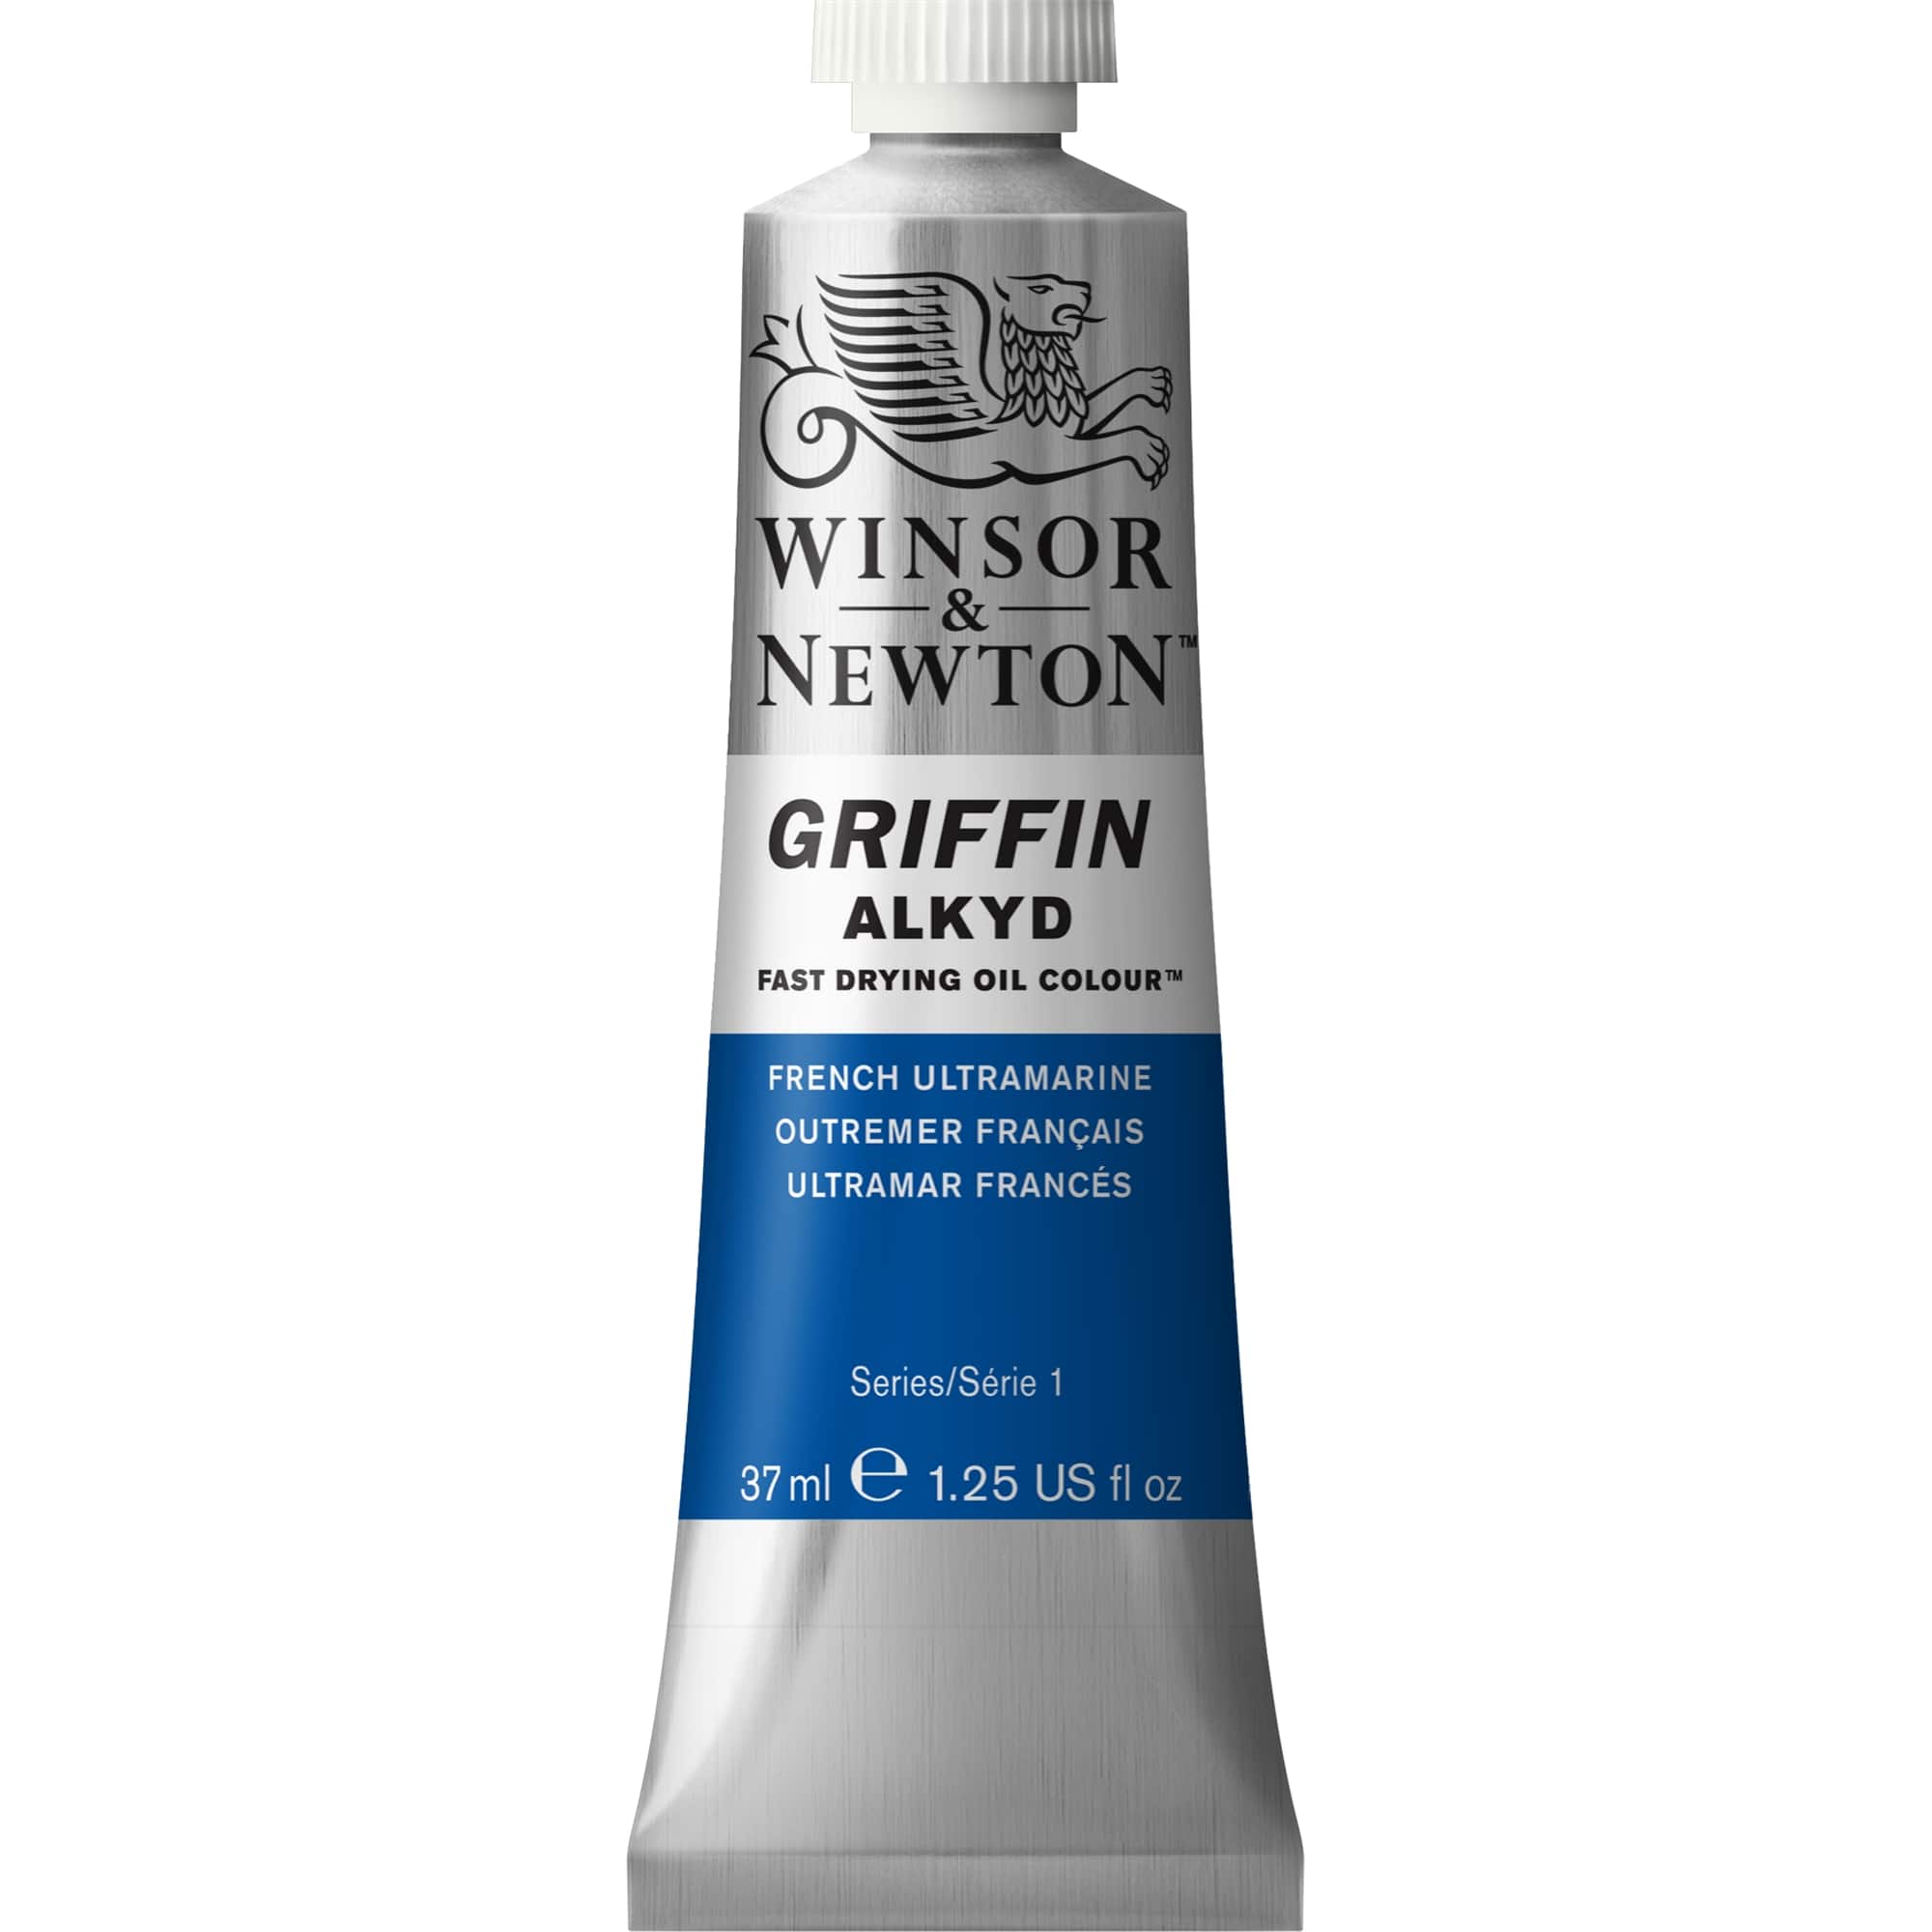 Winsor & Newton Oil & Alkyd Solvents